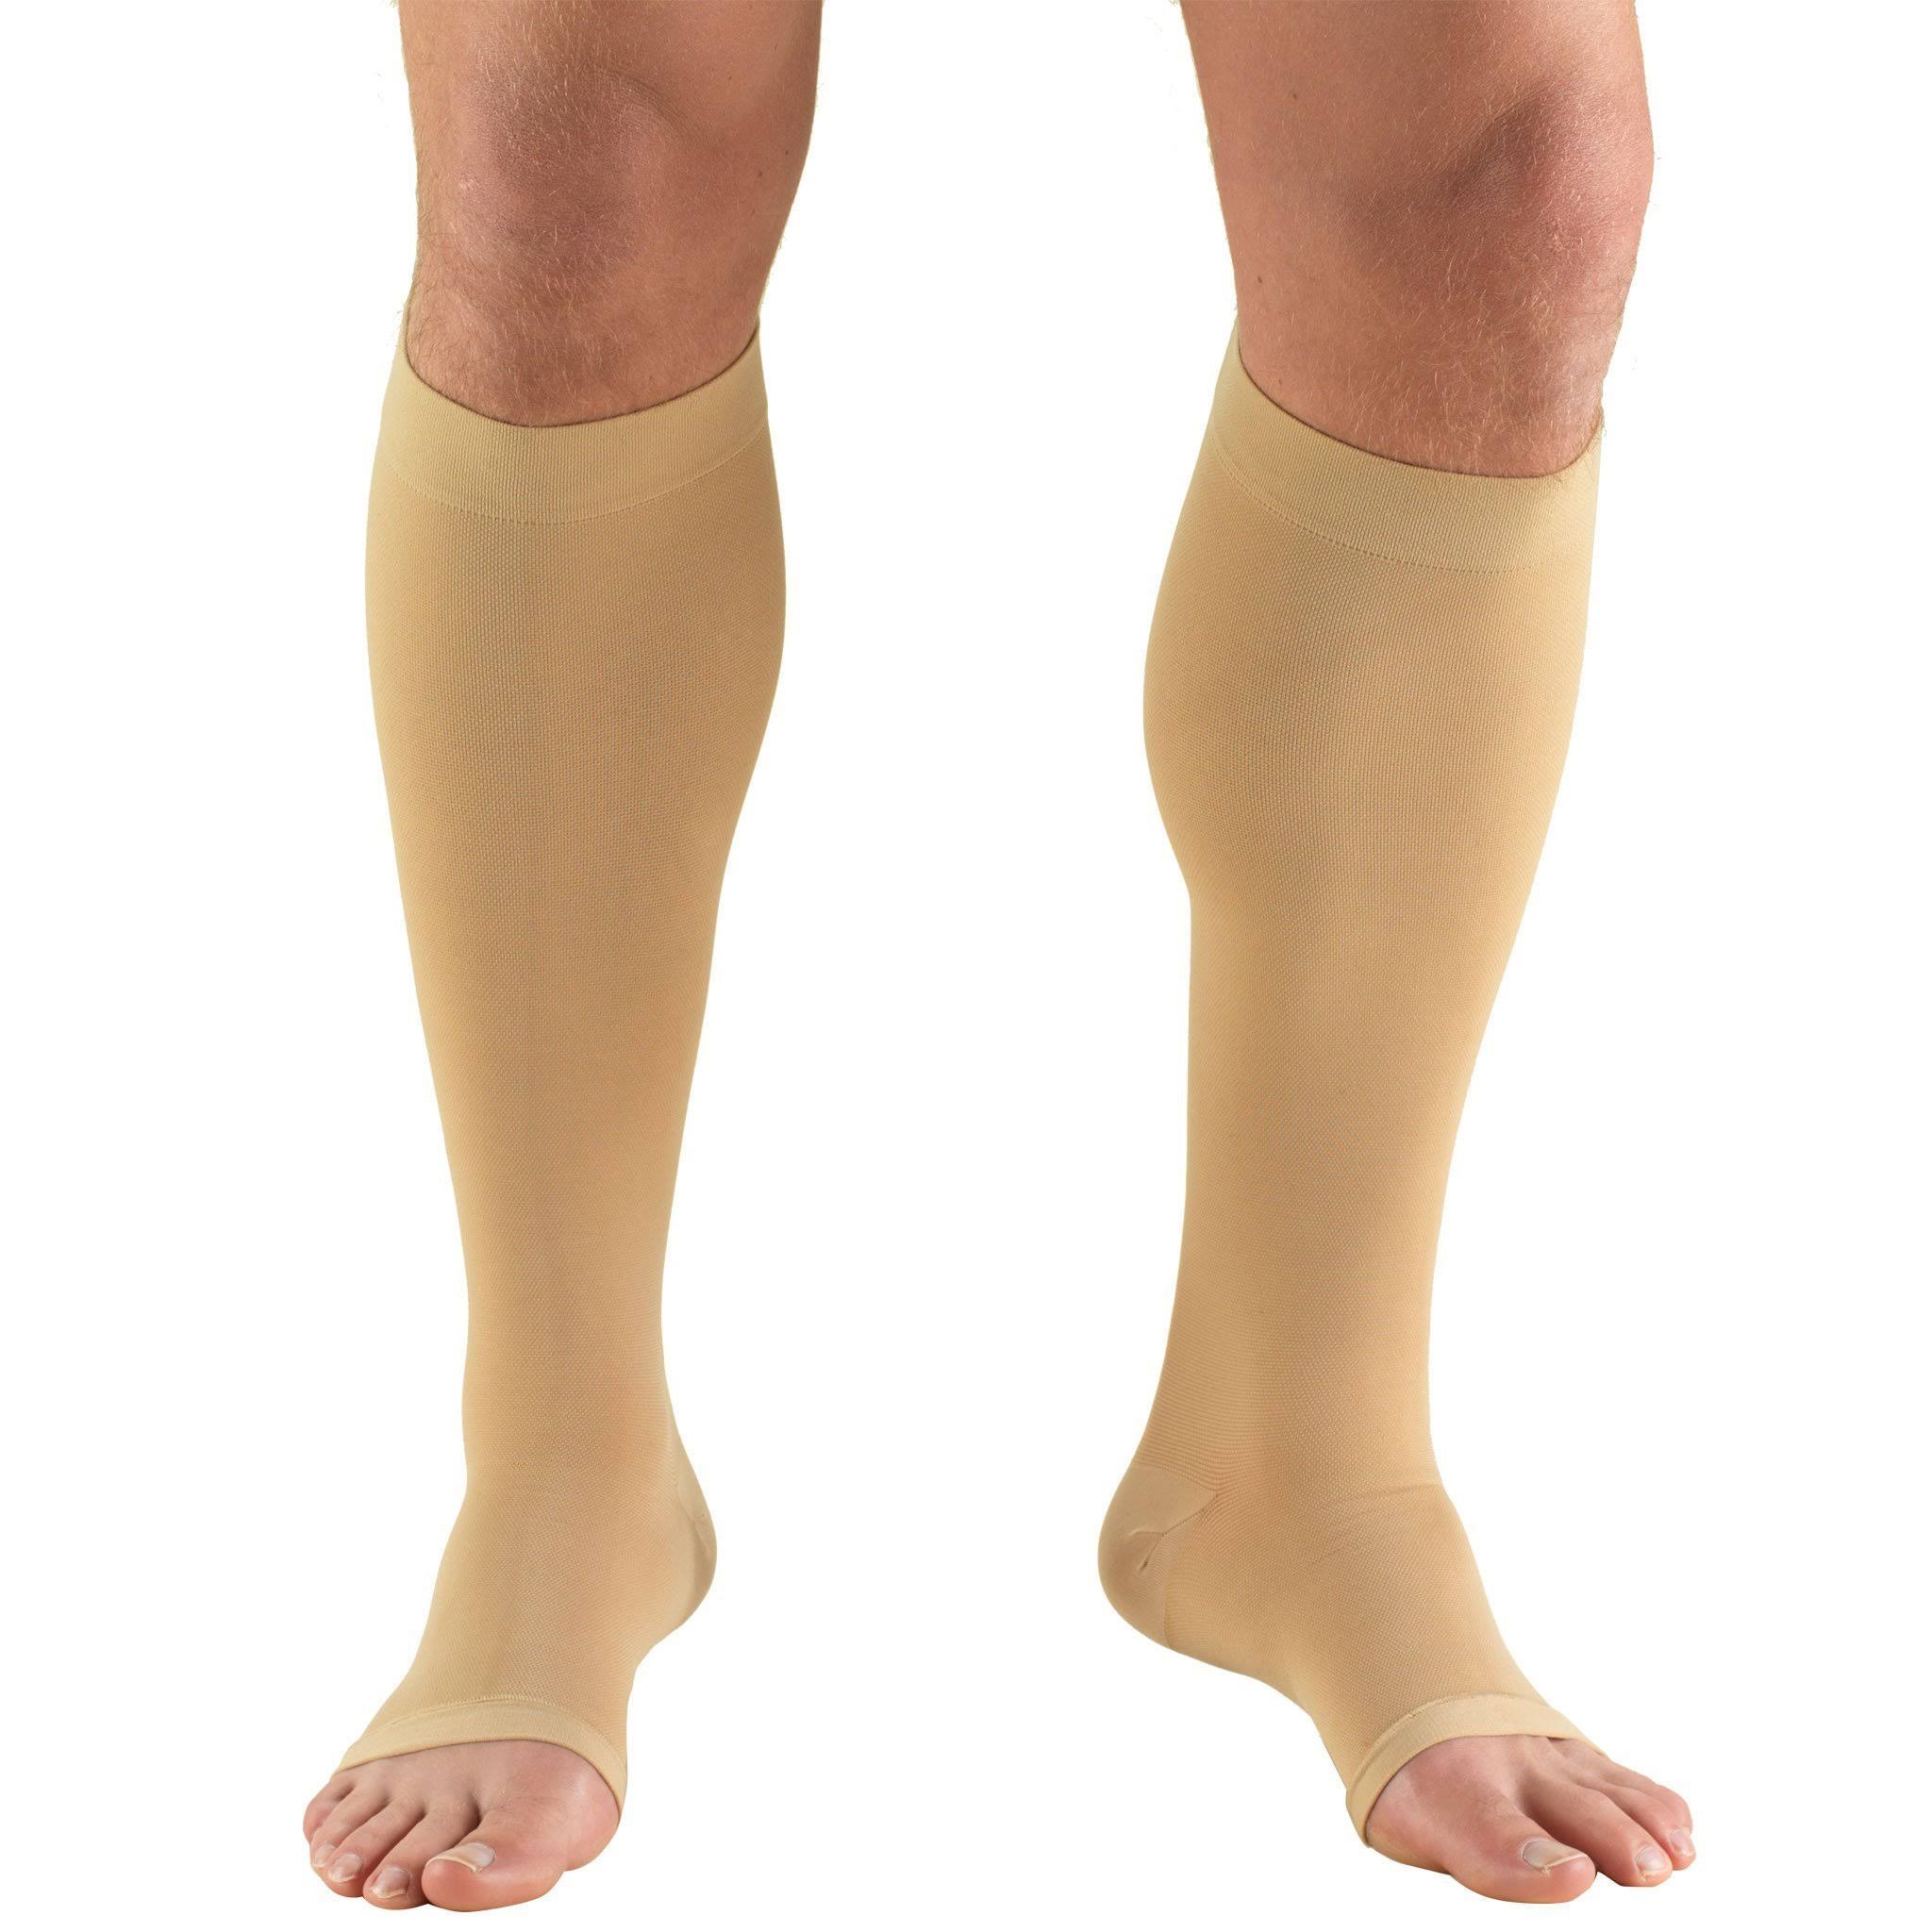 Truform Open Toe Knee High Compression Stockings - Beige, X-Large, 20 to 30 mmHg